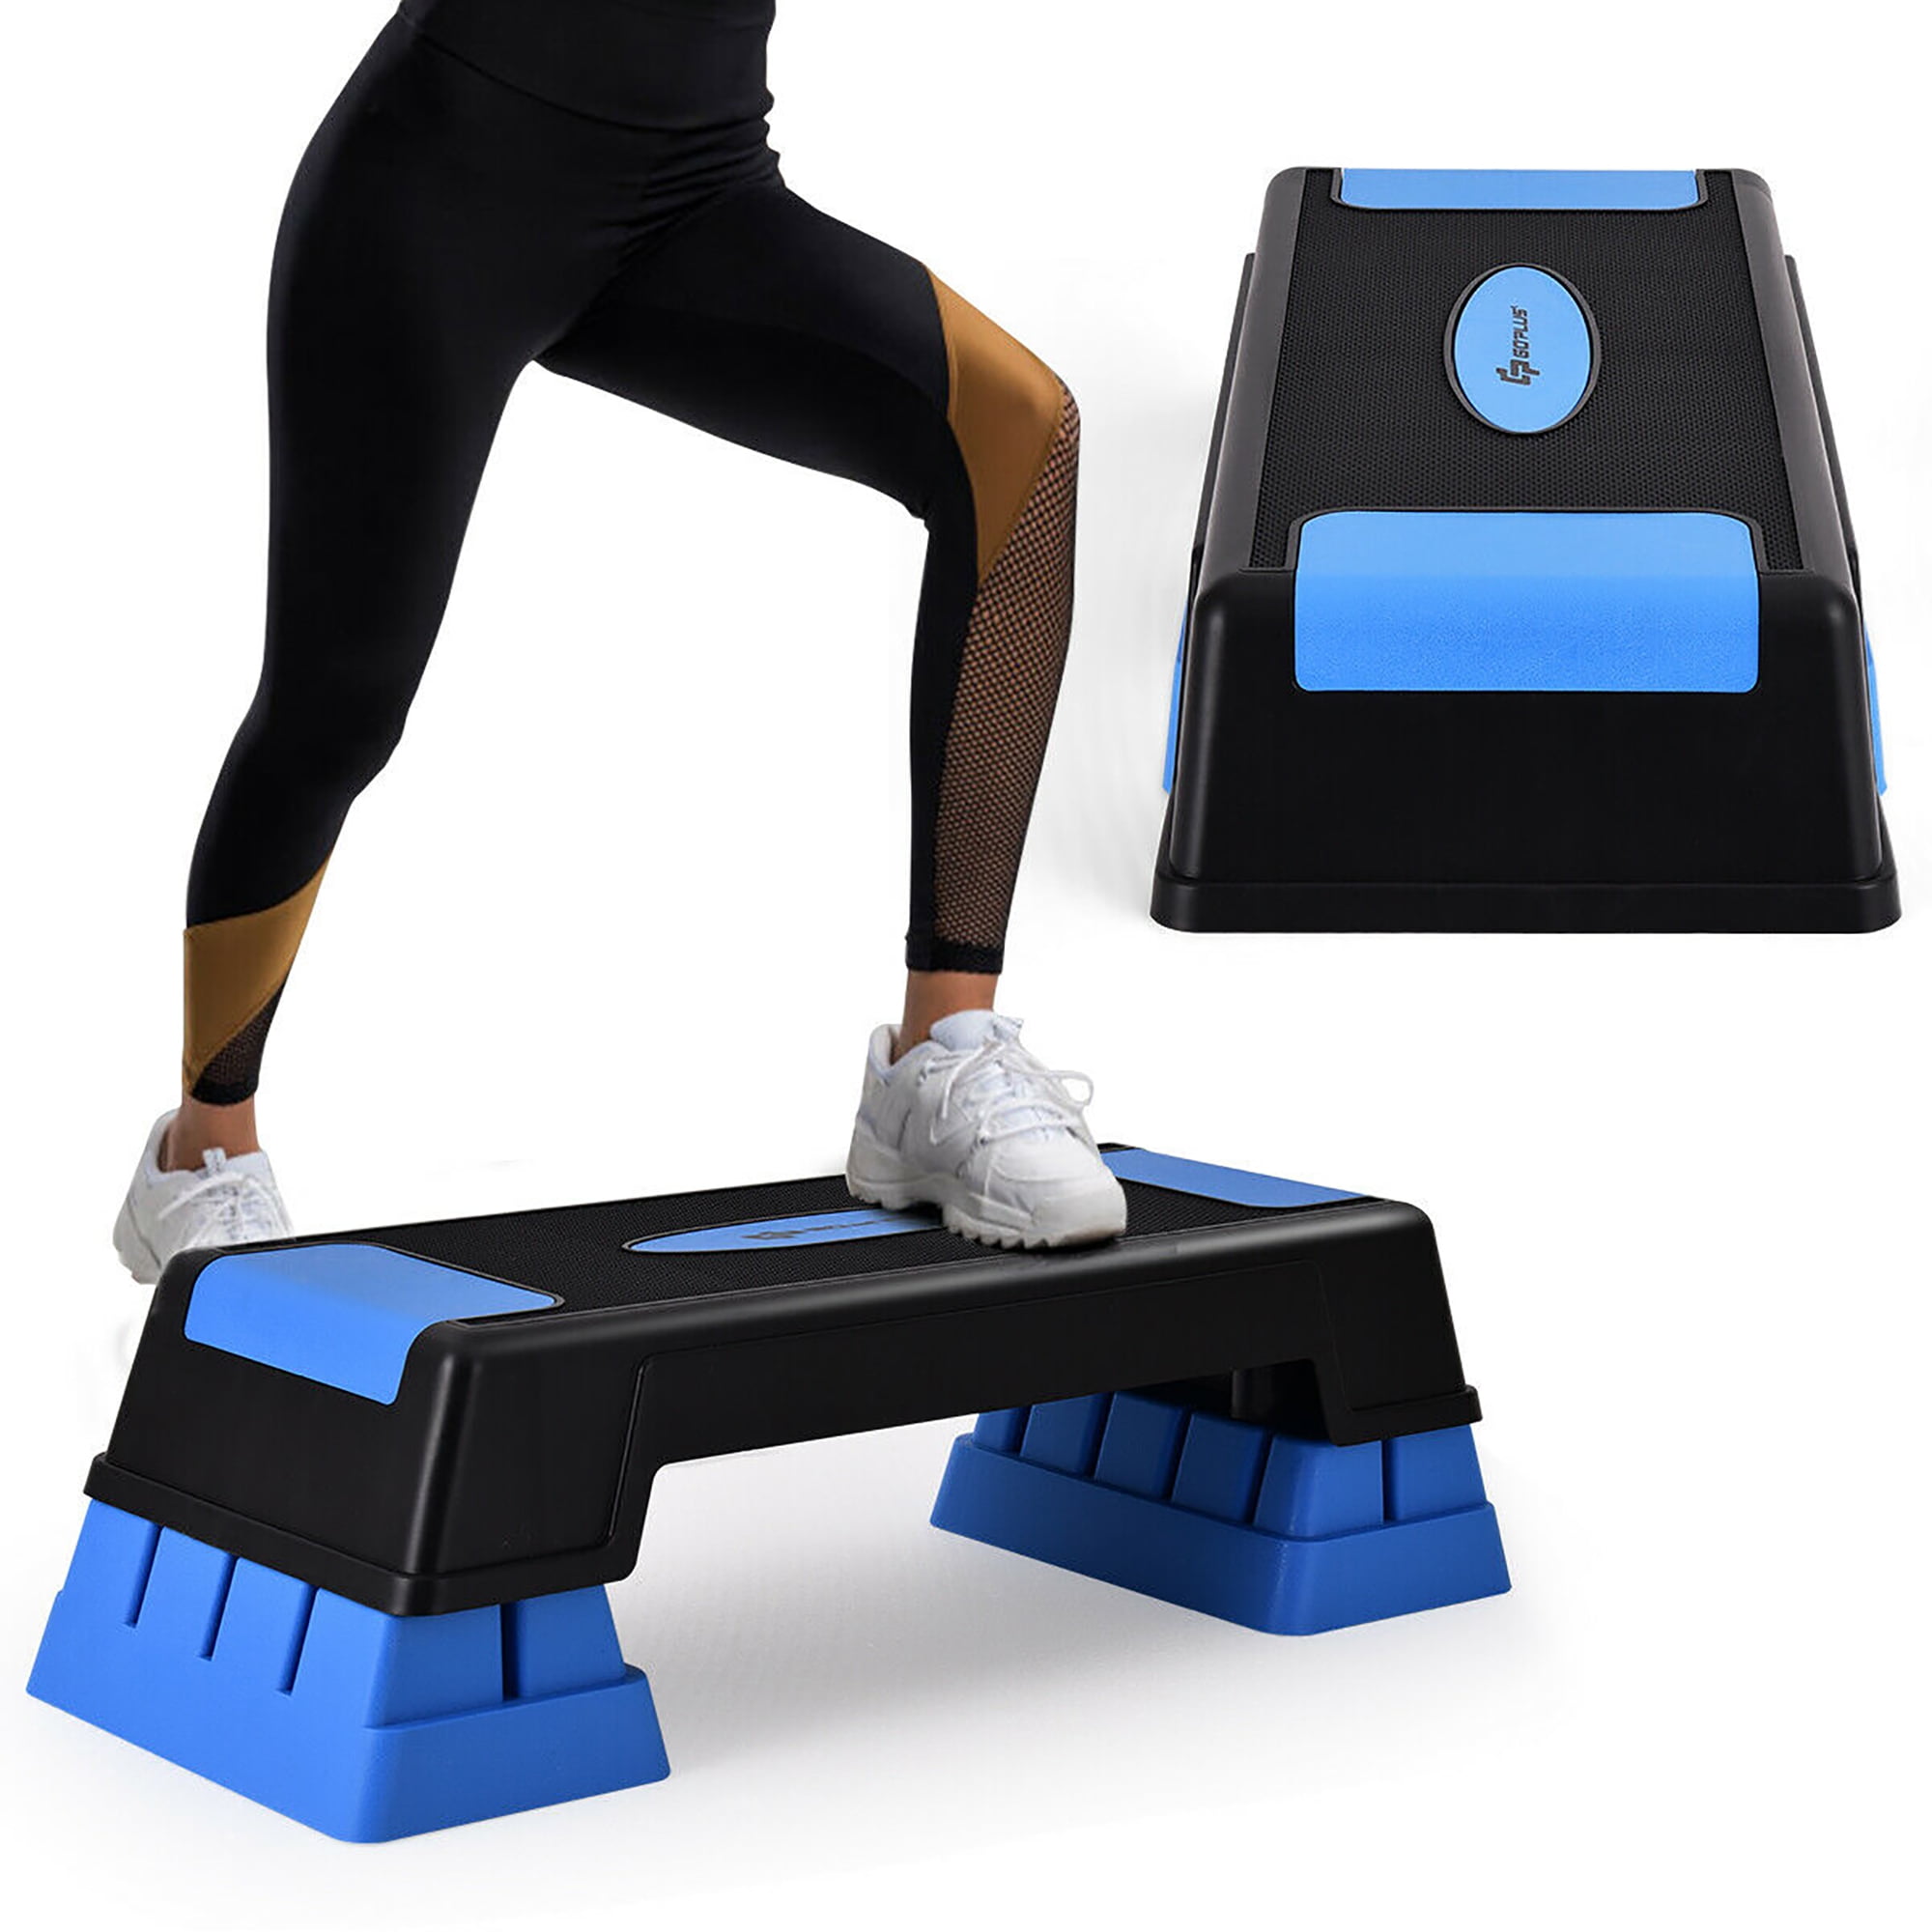 COSTWAY 3 Level Aerobic Stepper Compact Aerobics Trainer Exercise Yoga Fitness Gym Home Step Adjustable Training Board